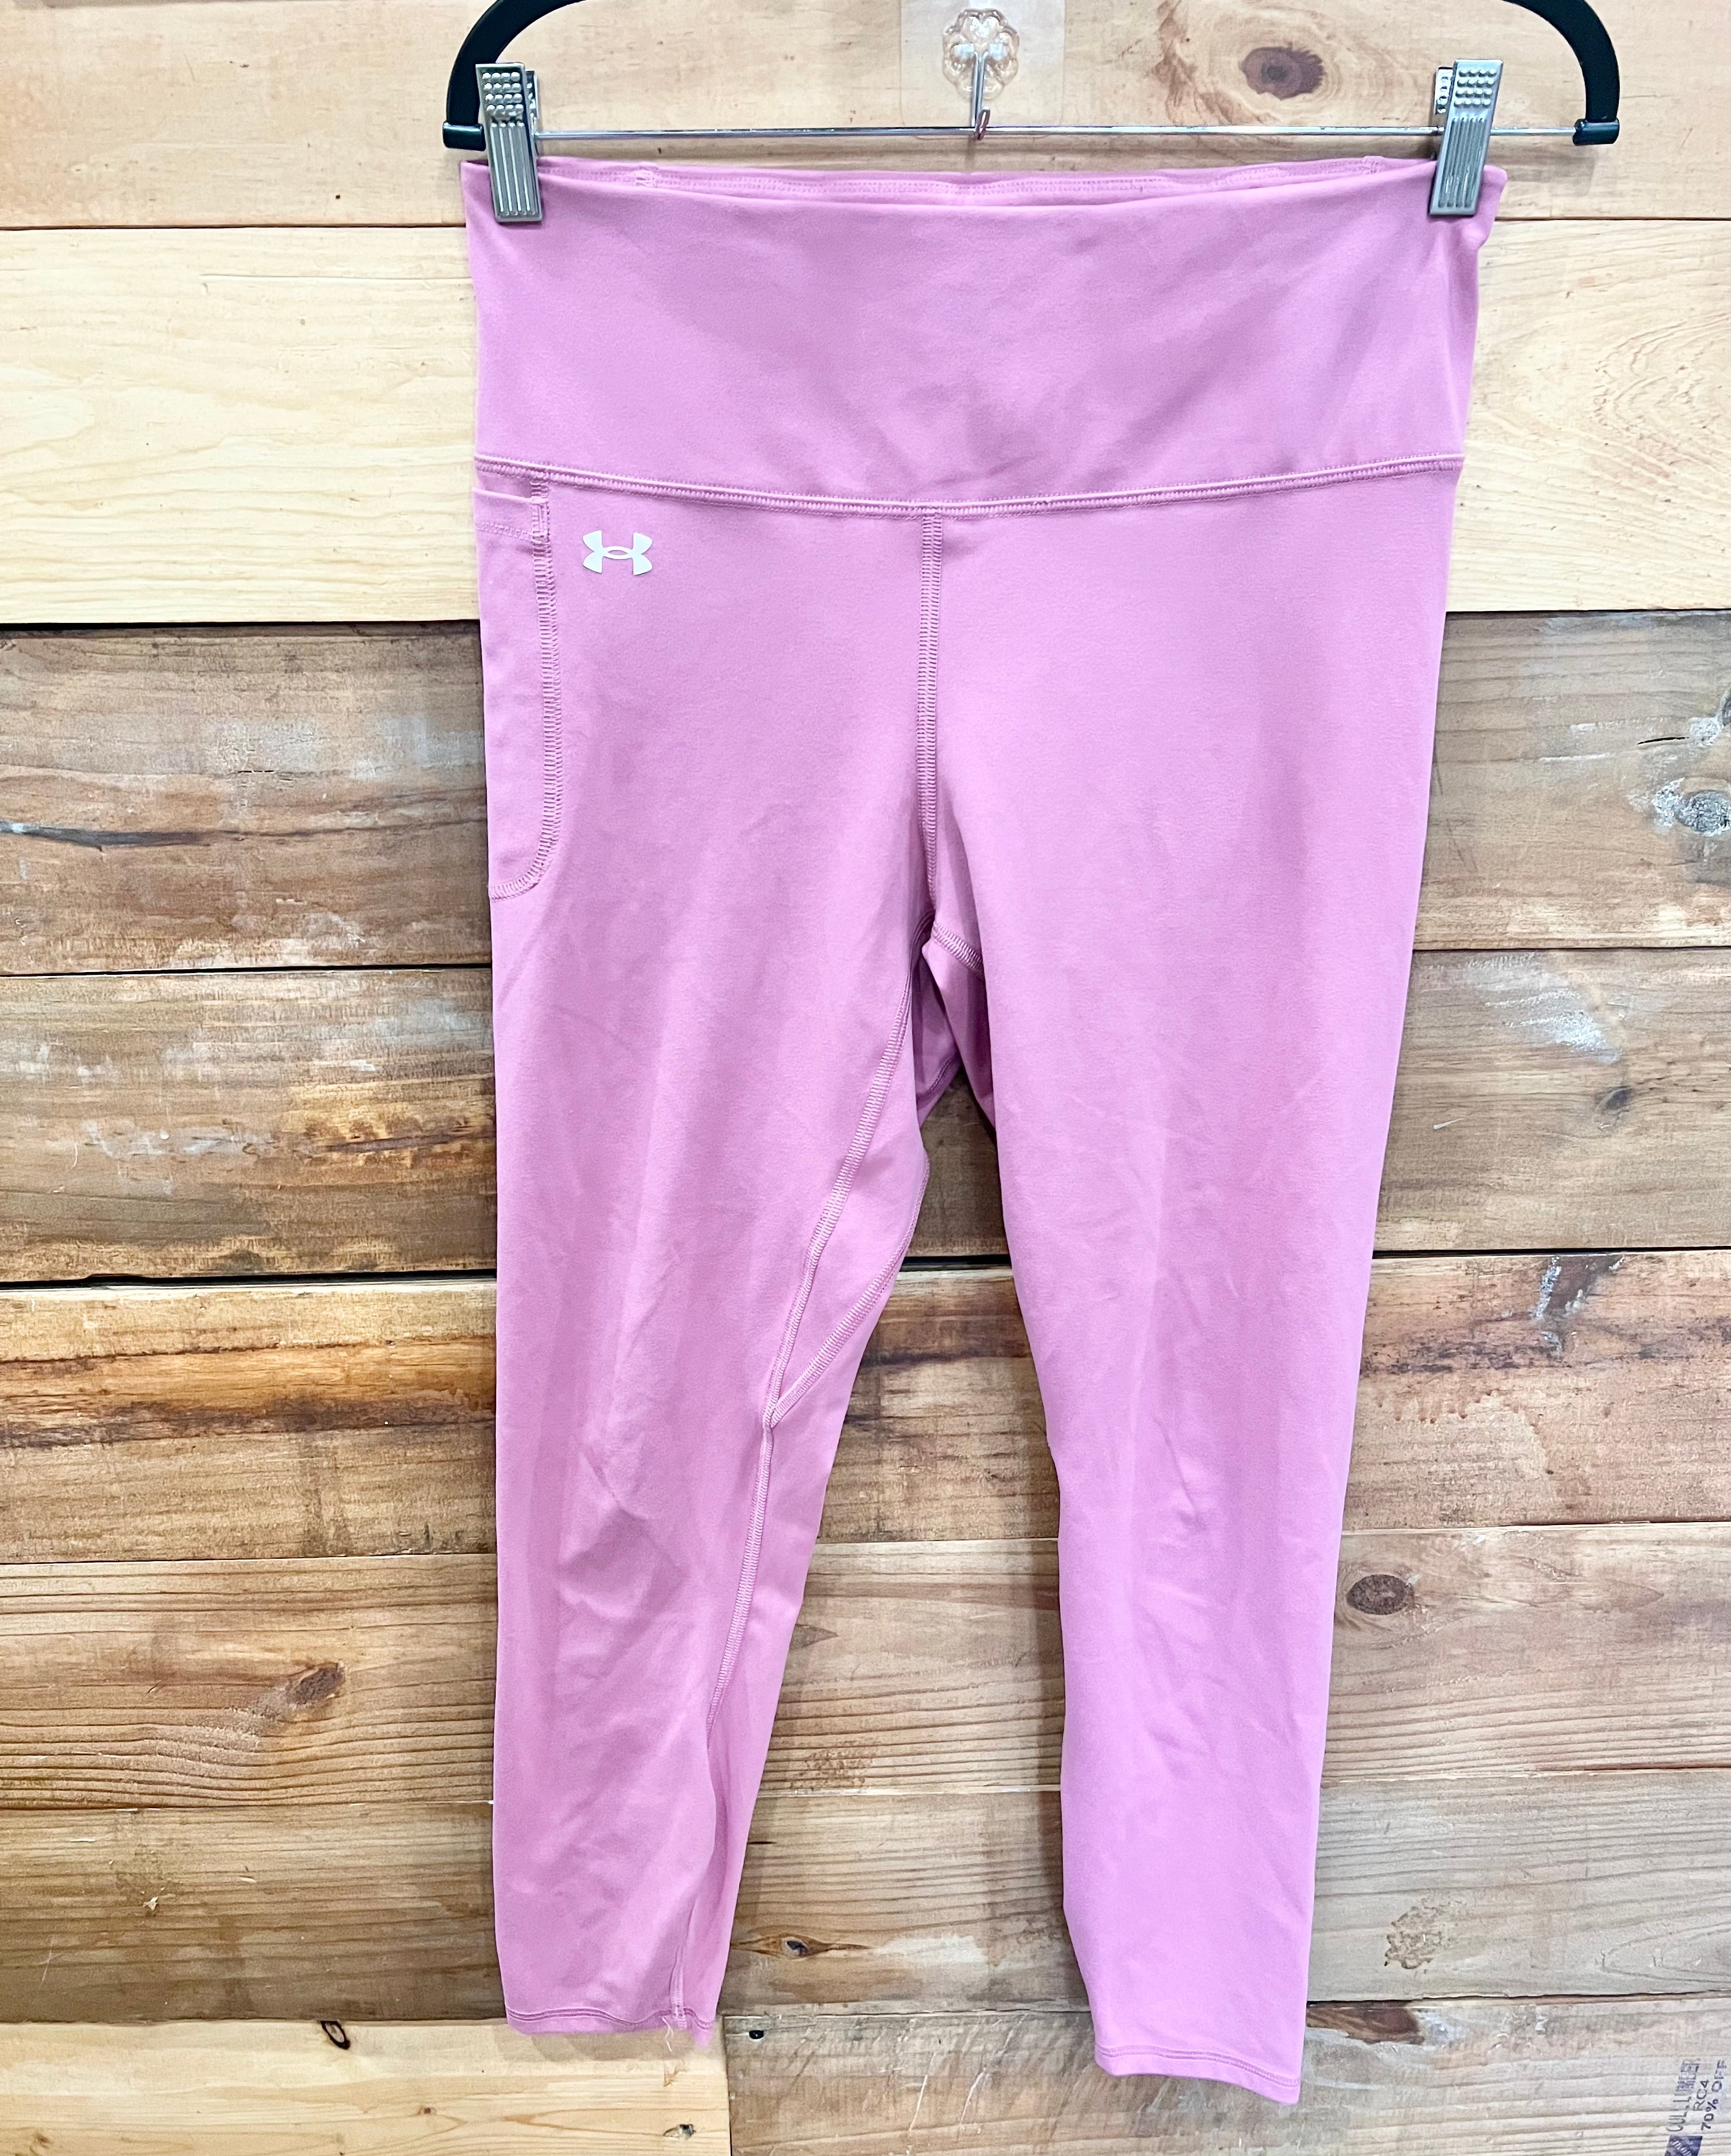 Lululemon Pink Cropped Leggings (6) – BinxBerry Consignment